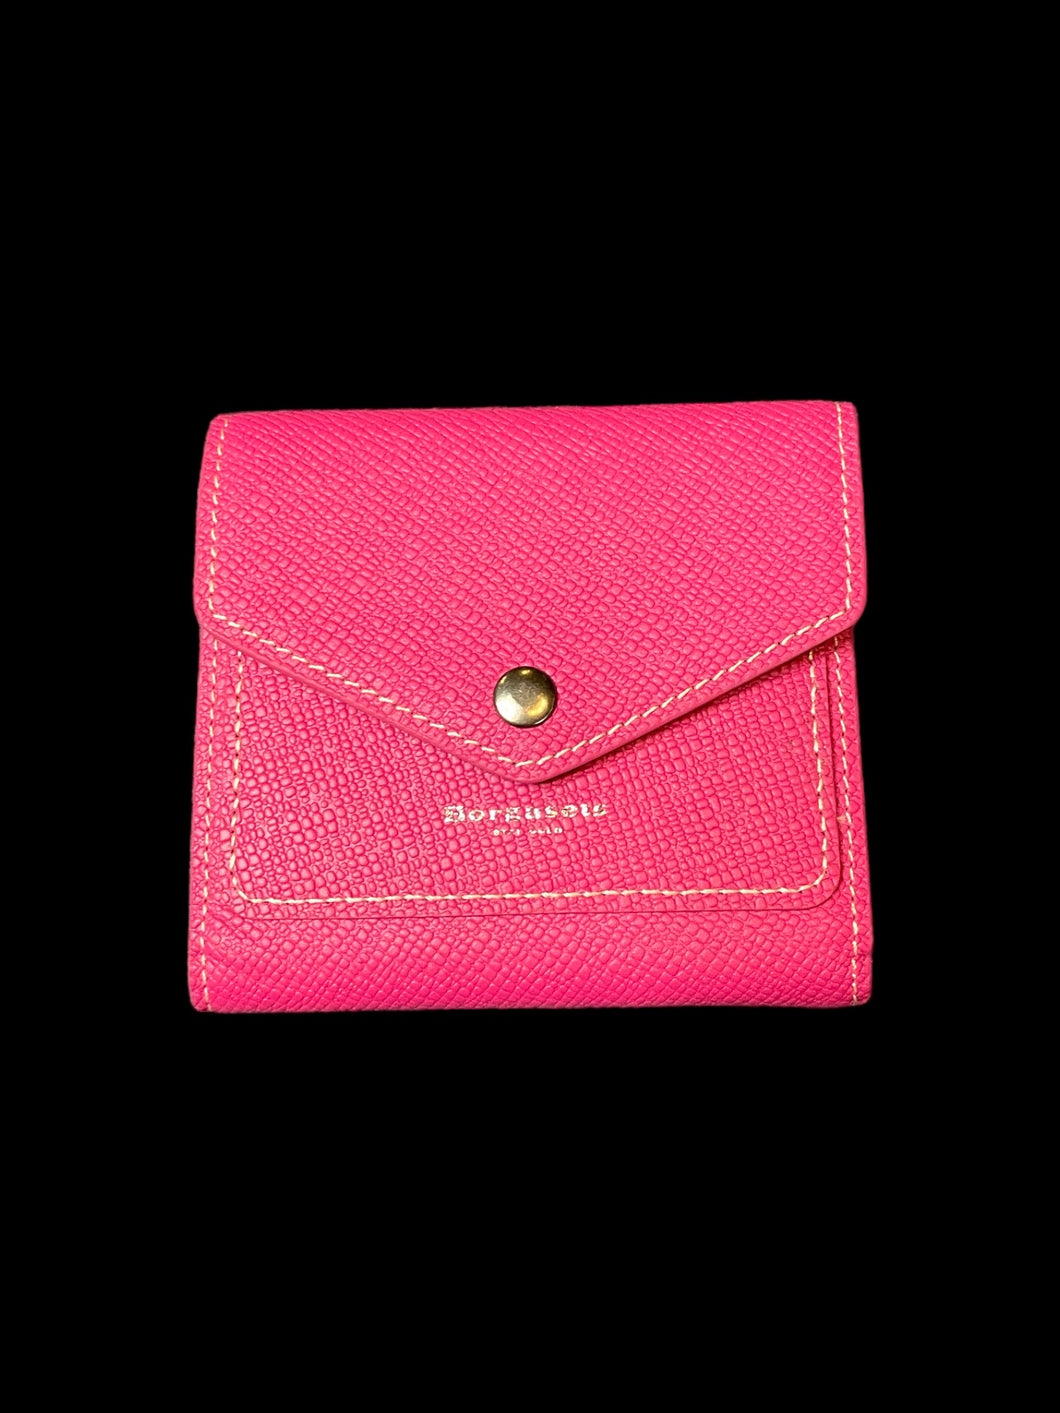 Pink pleather trifold envelope wallet w/ snap closure